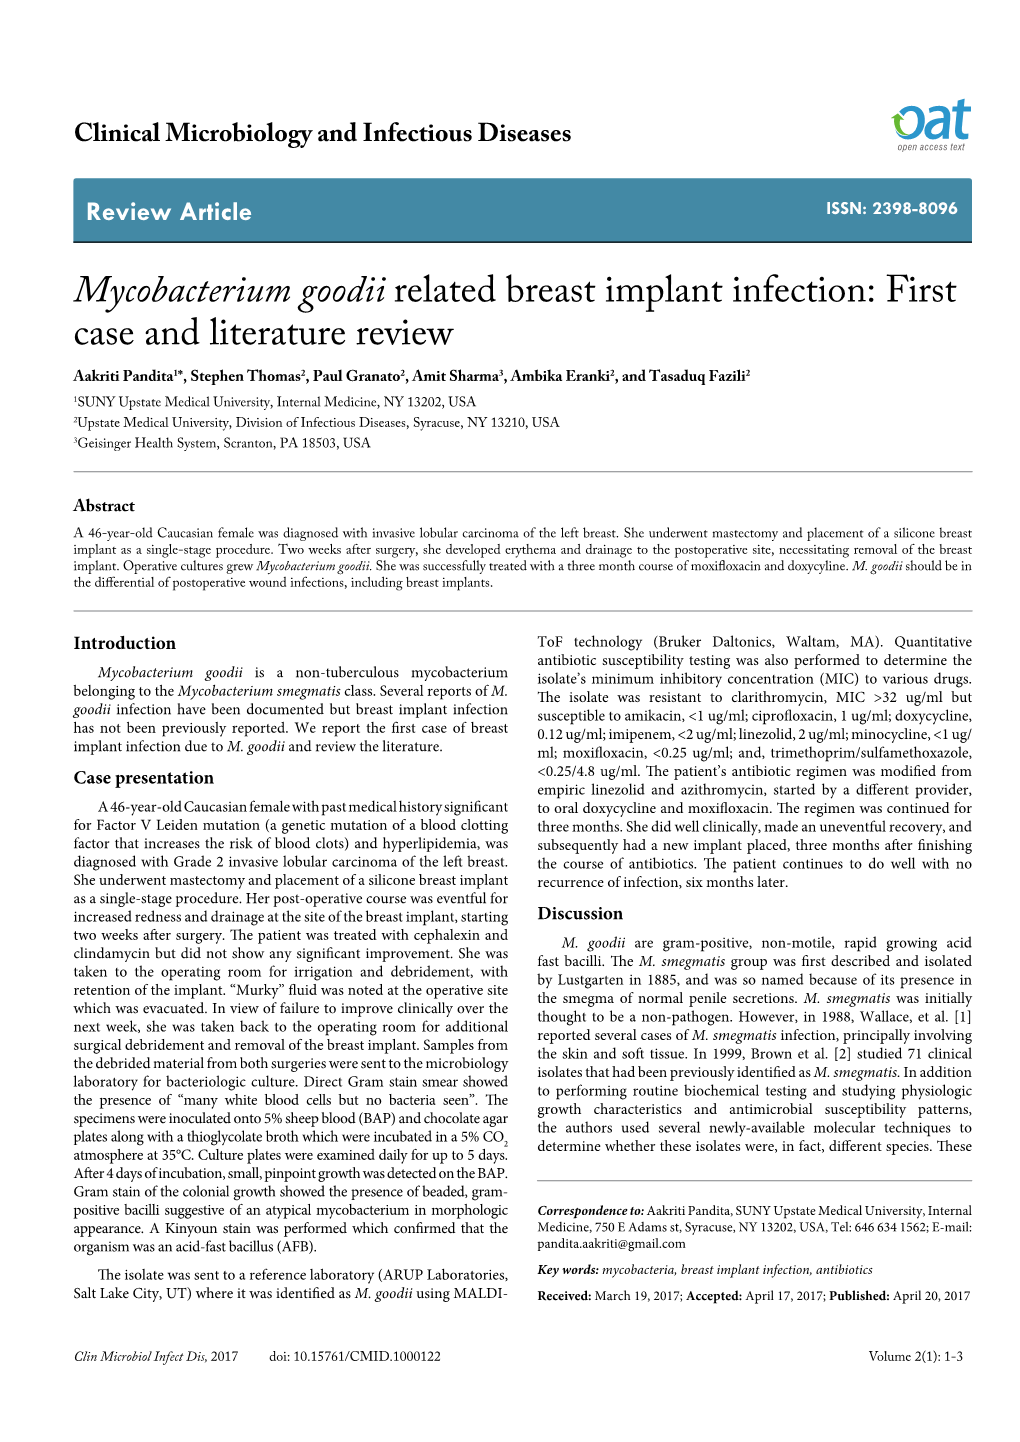 Mycobacterium Goodii Related Breast Implant Infection